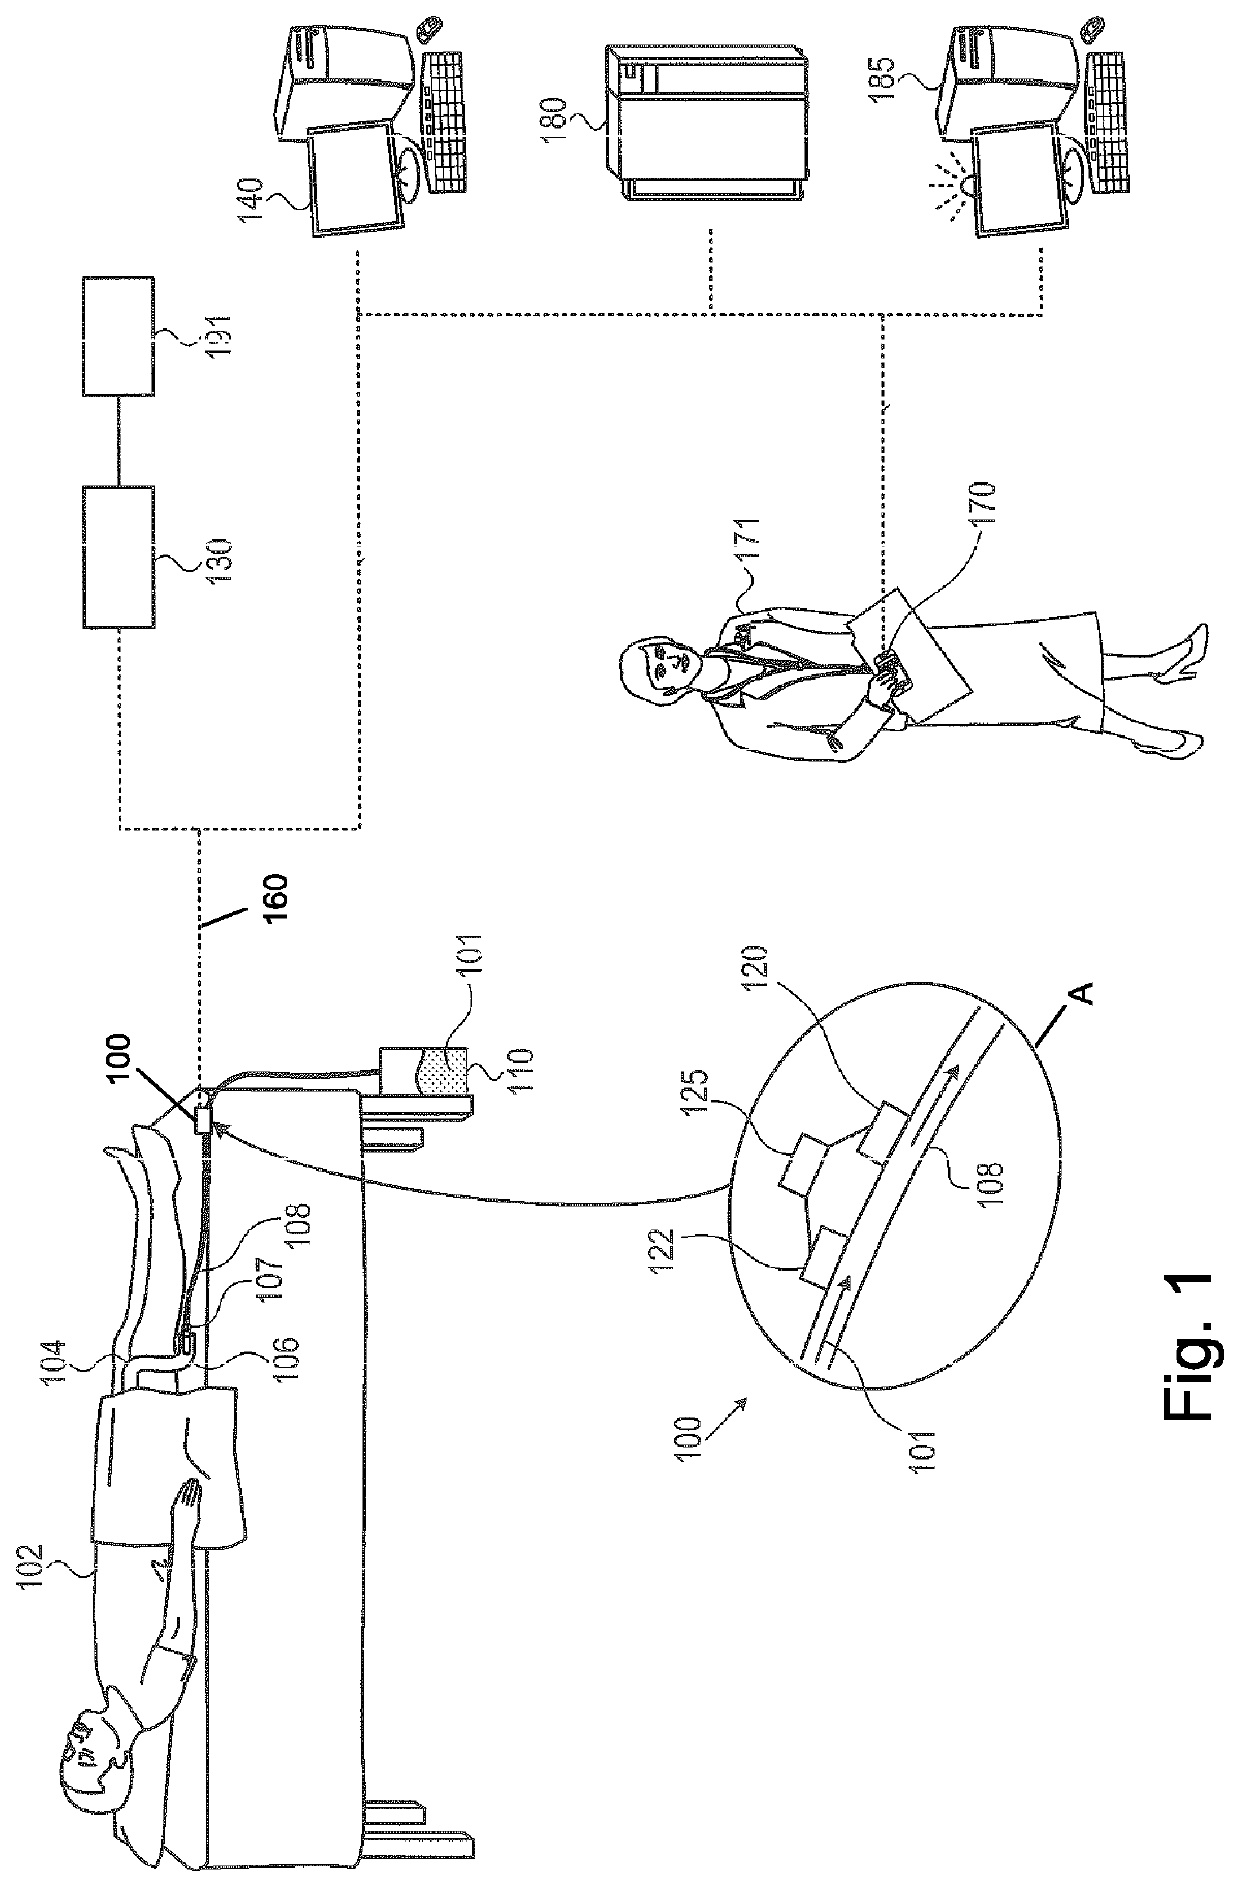 Apparatus, system, and methods for urinalysis